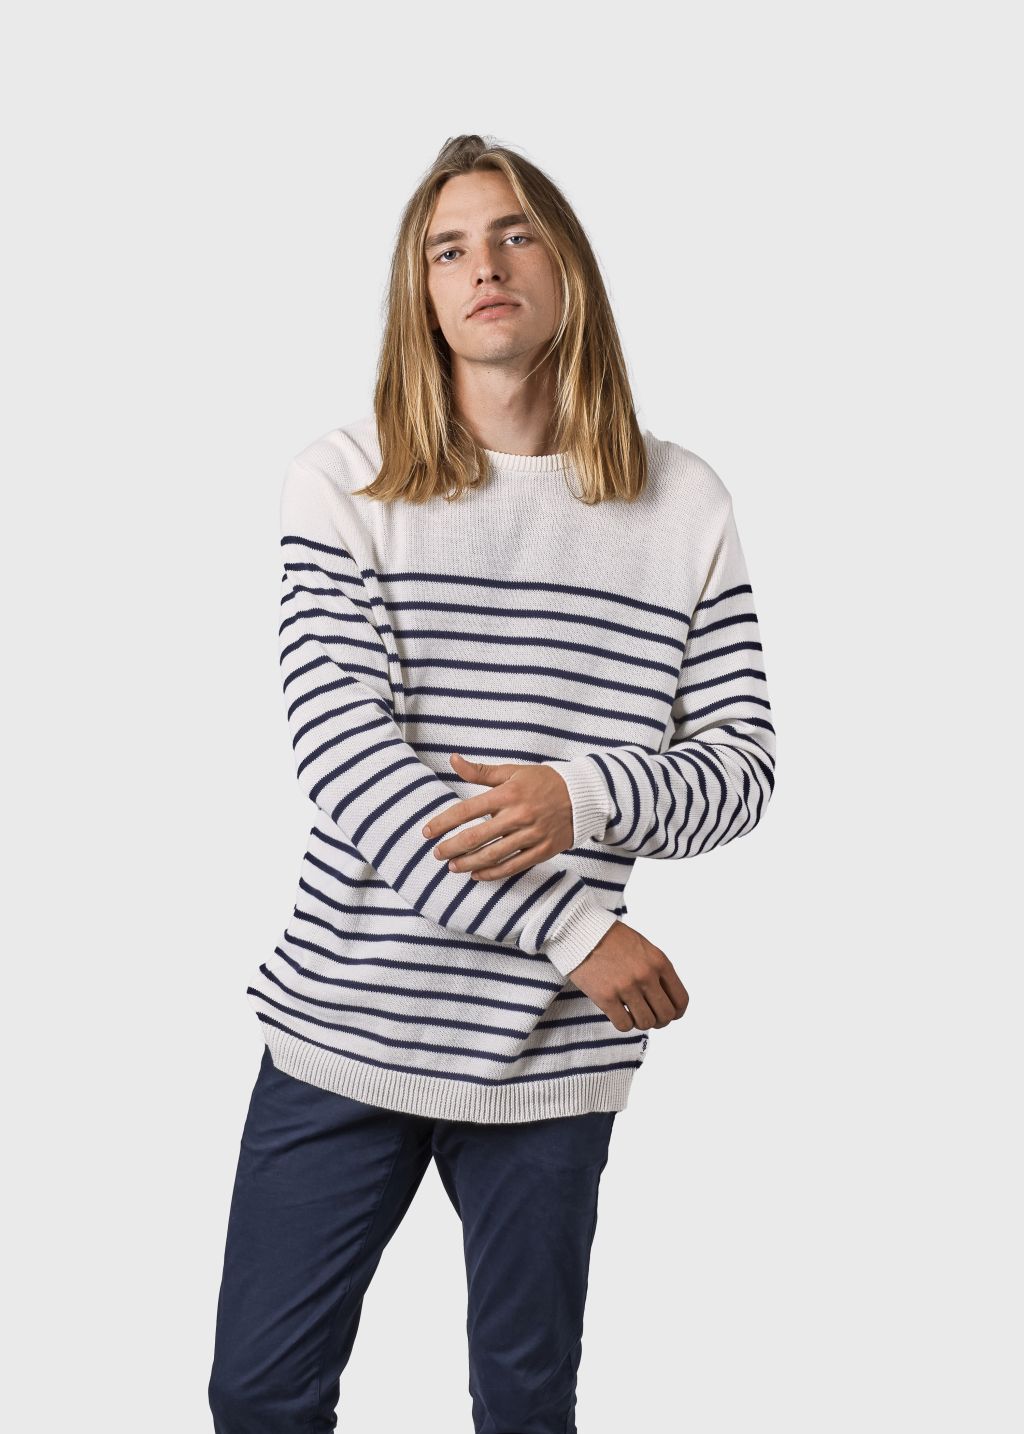 Godtfred Knit - Pullover - Cream/Navy XS